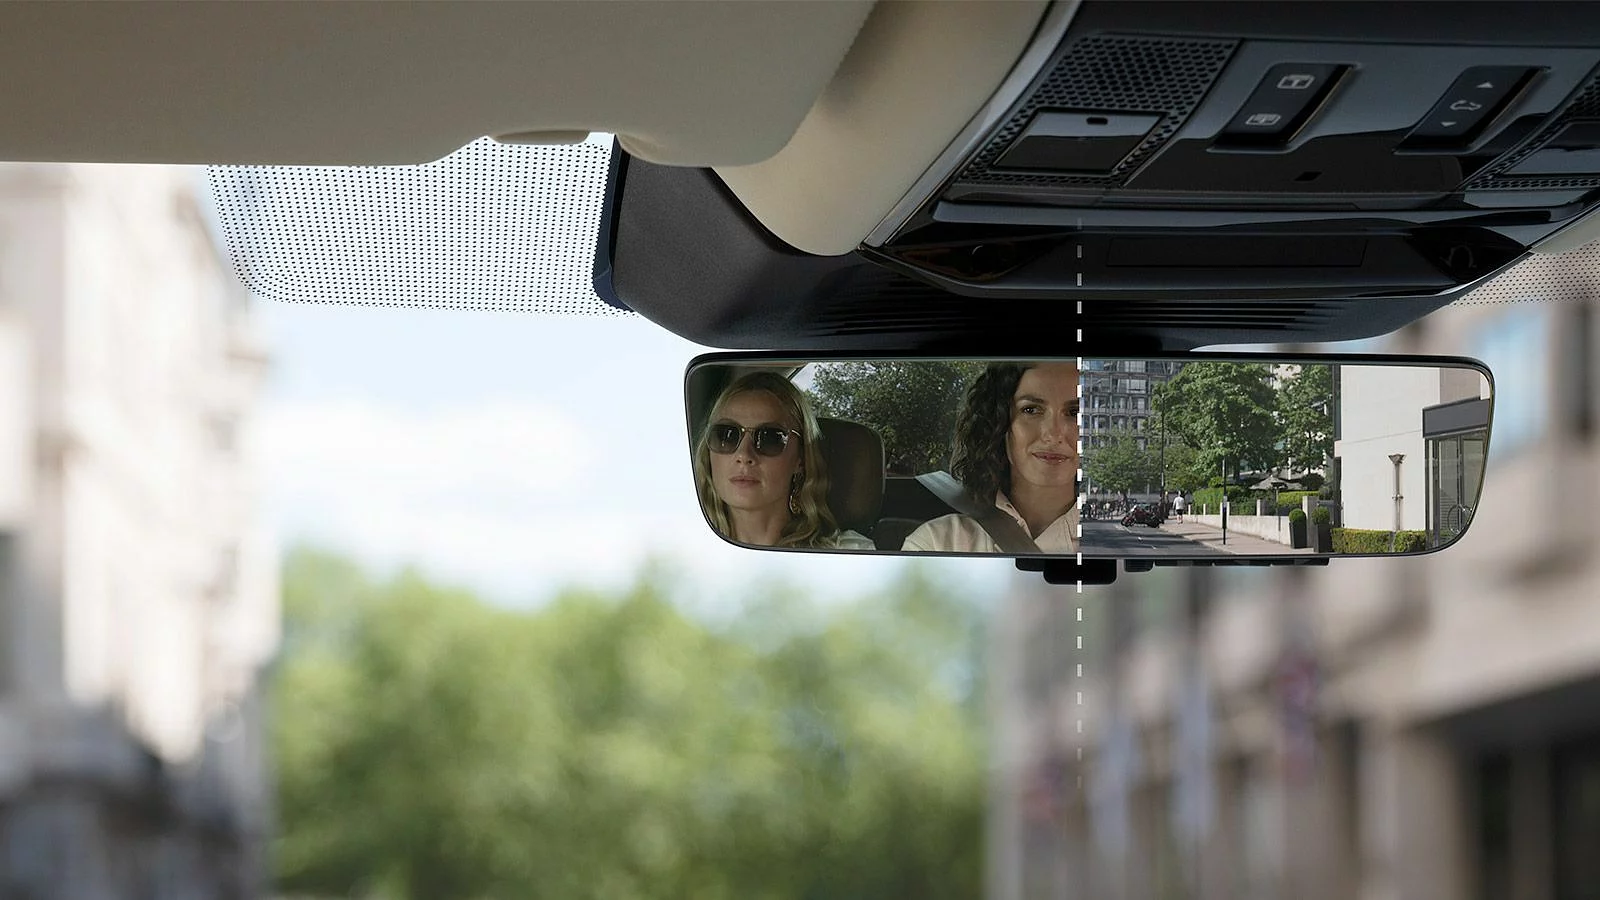 CLEARSIGHT INTERIOR REAR VIEW MIRROR